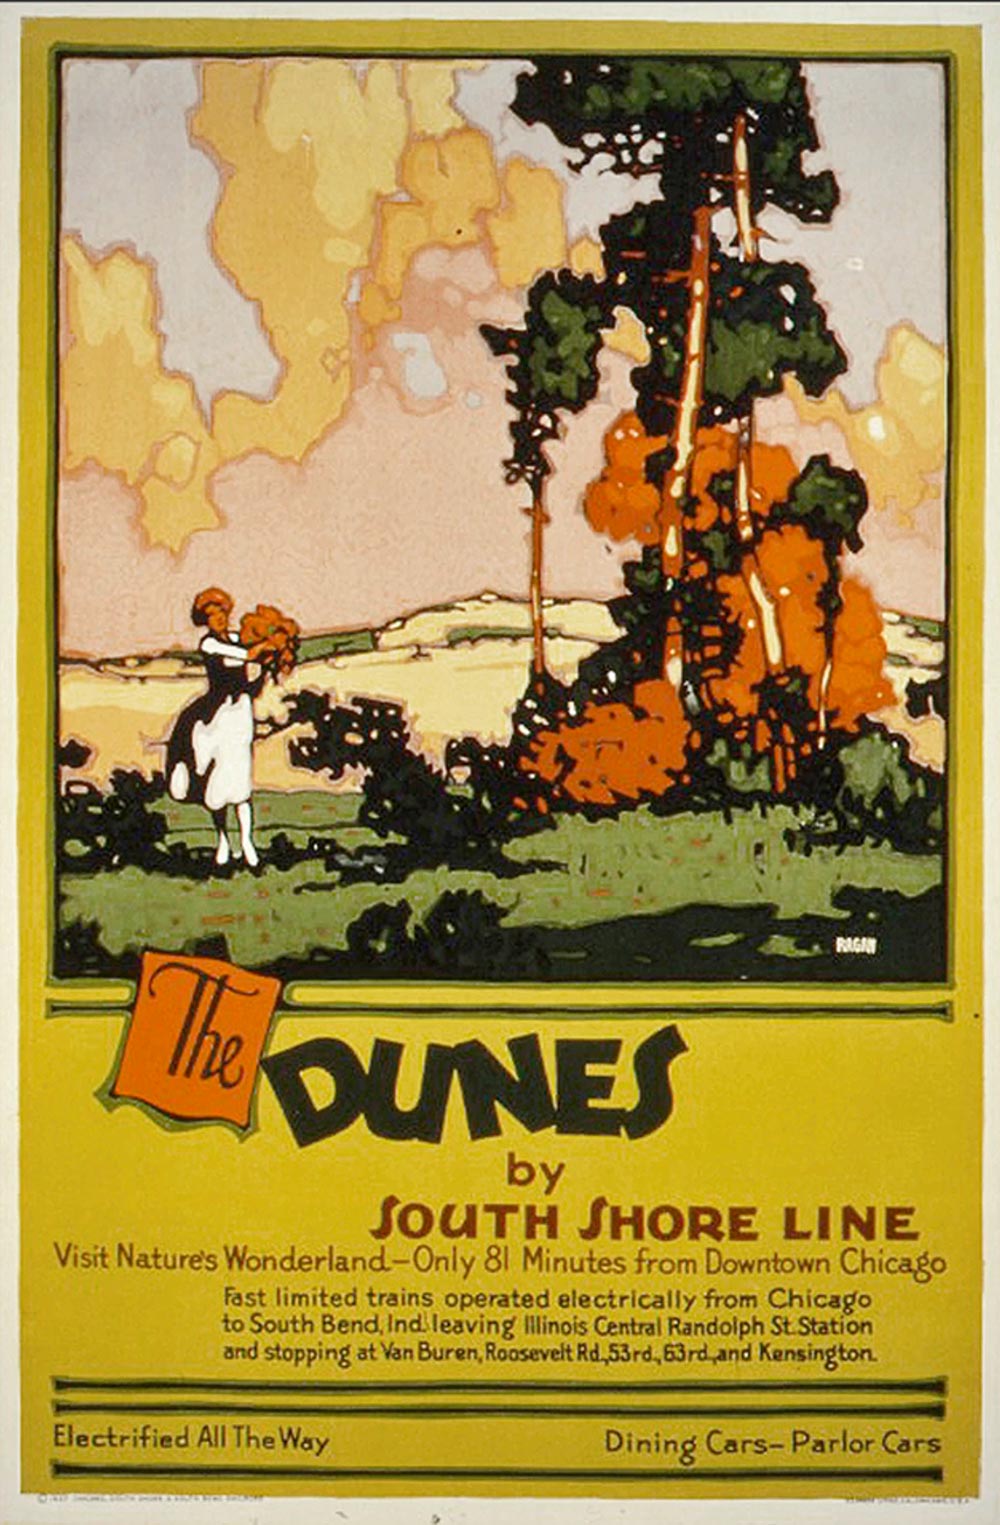 South-Shore-Line-posters-the-Dunes